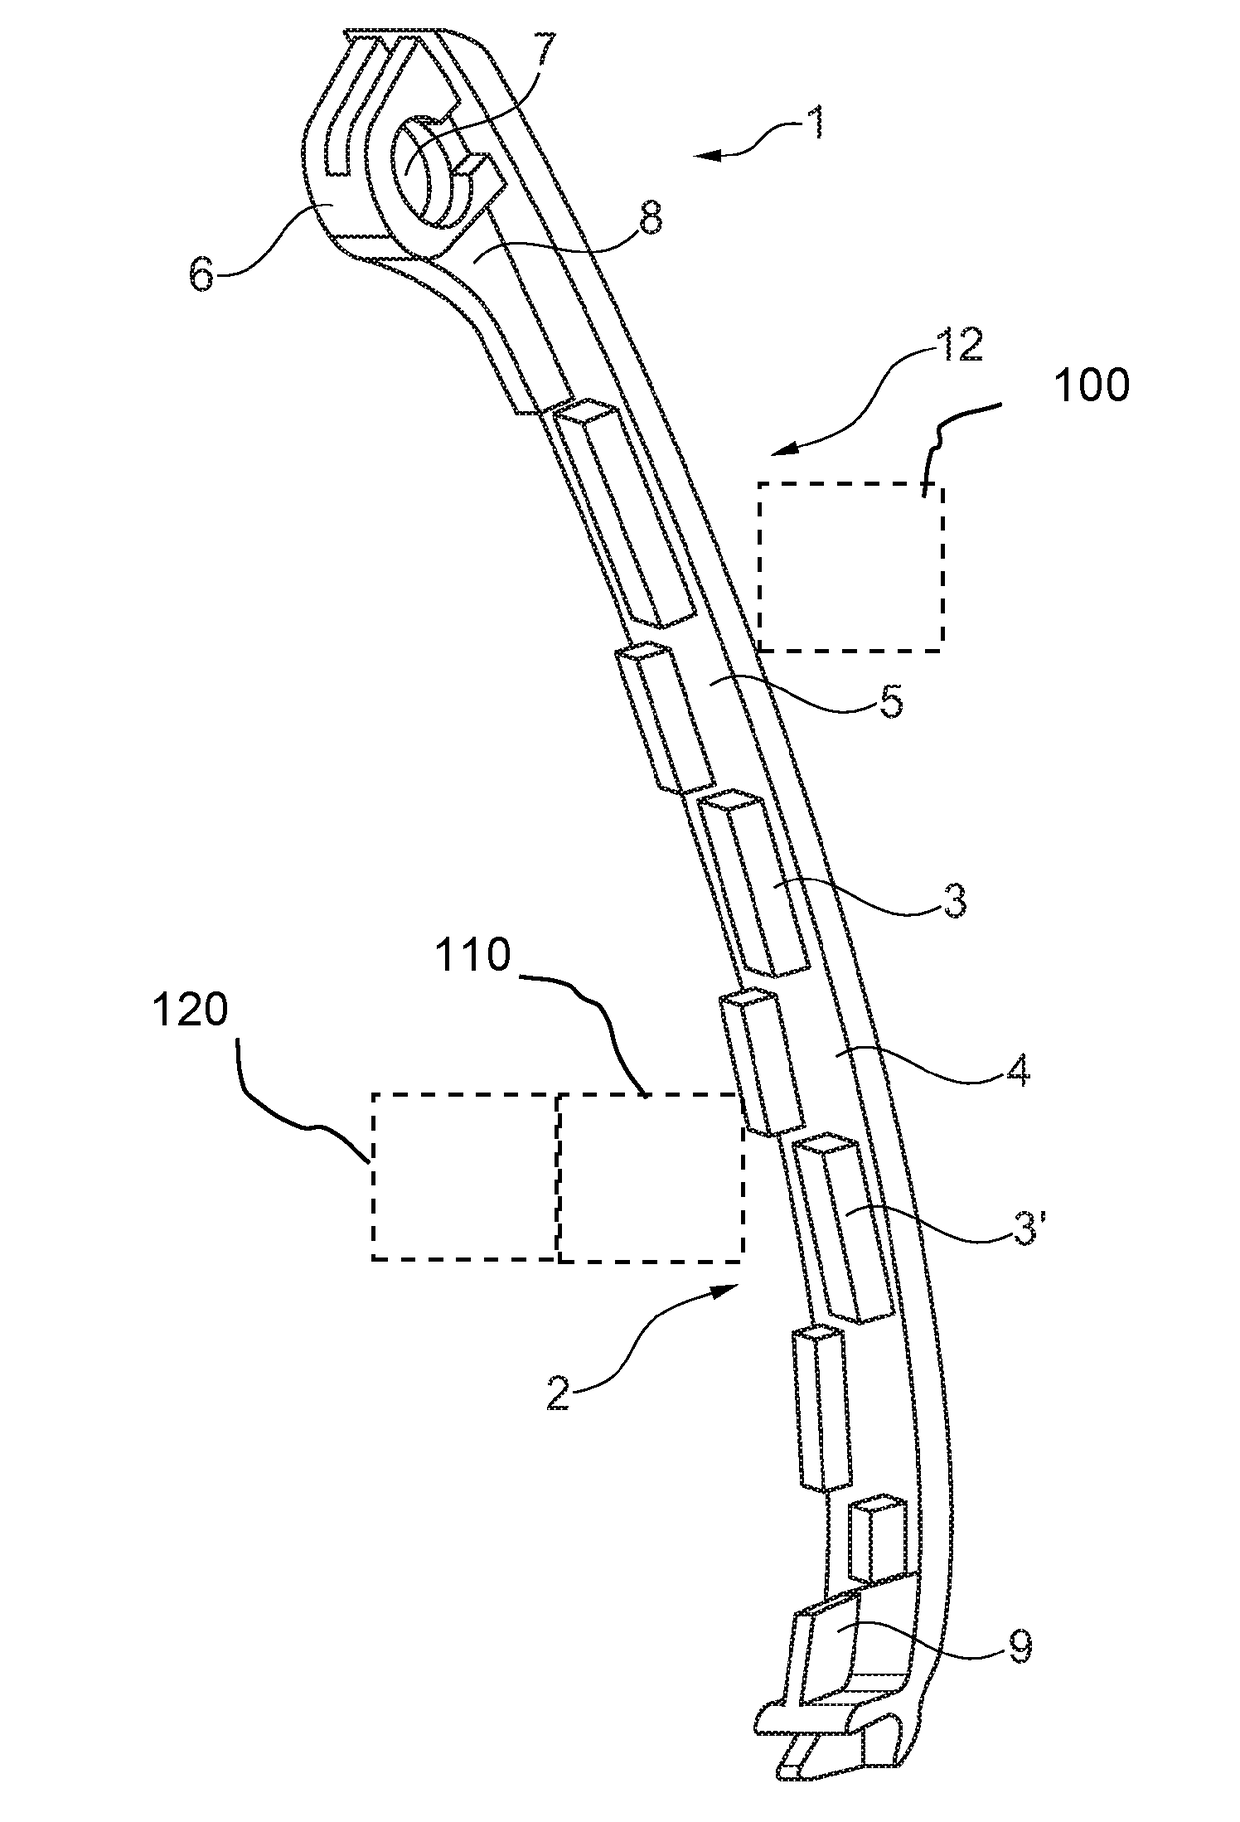 Supporting body comprising a receiving groove for a reinforcement panel